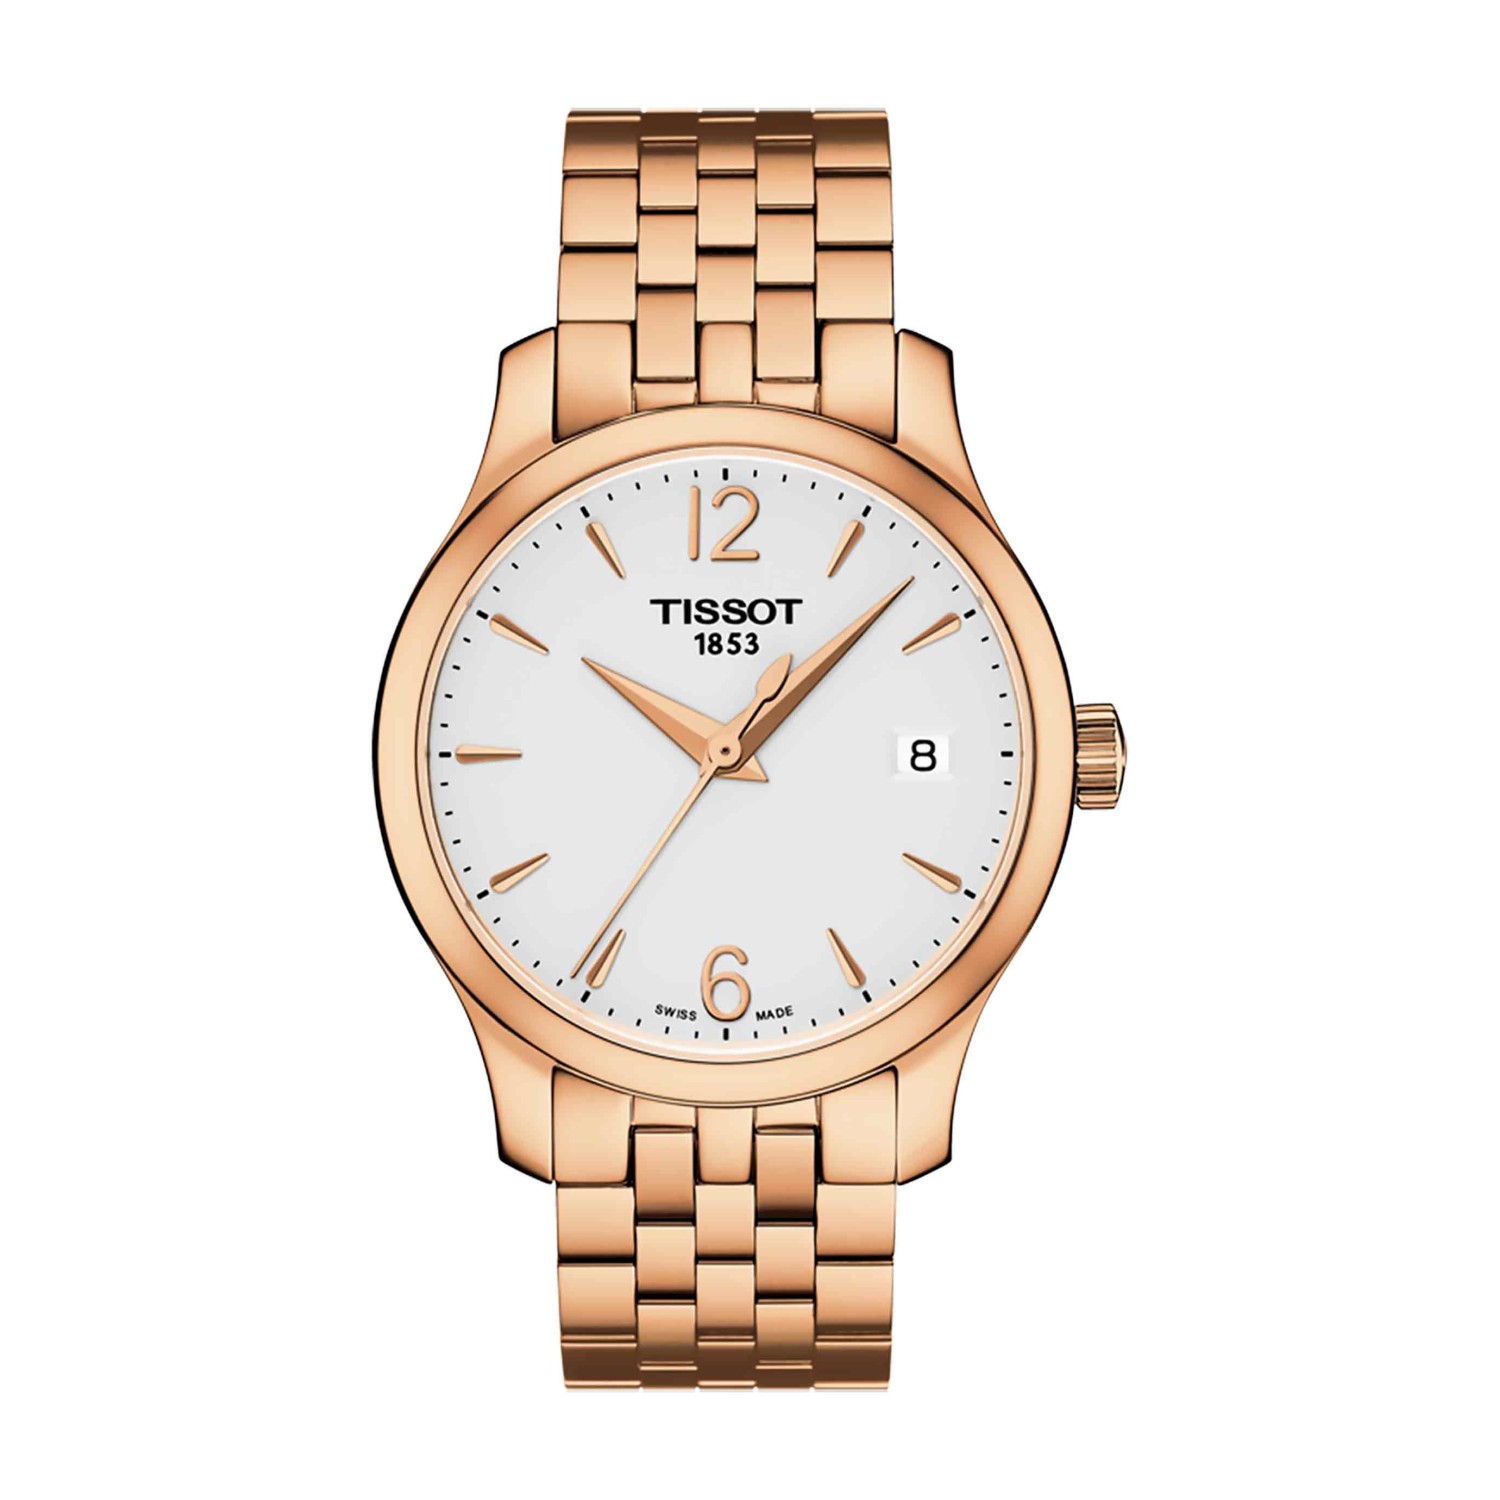 TISSOT T-Classic Tradition Lady T063.210.33.037.00. The Tissot Tradition family gives ultra-modern watchmaking a justified hint of nostalgia, giving today’s technology a vintage-style design signature. High-tech operation is perfectly balanced with classi